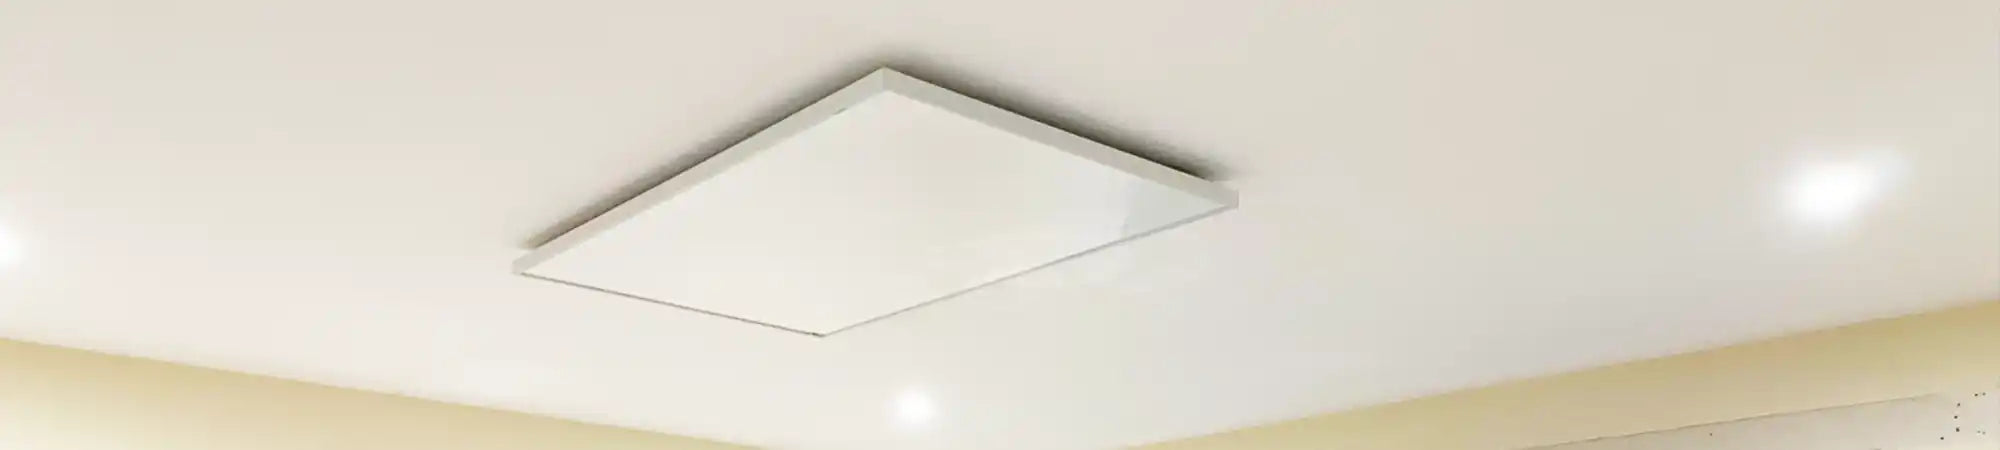 Ceiling Mounted Infrared Heater Panels